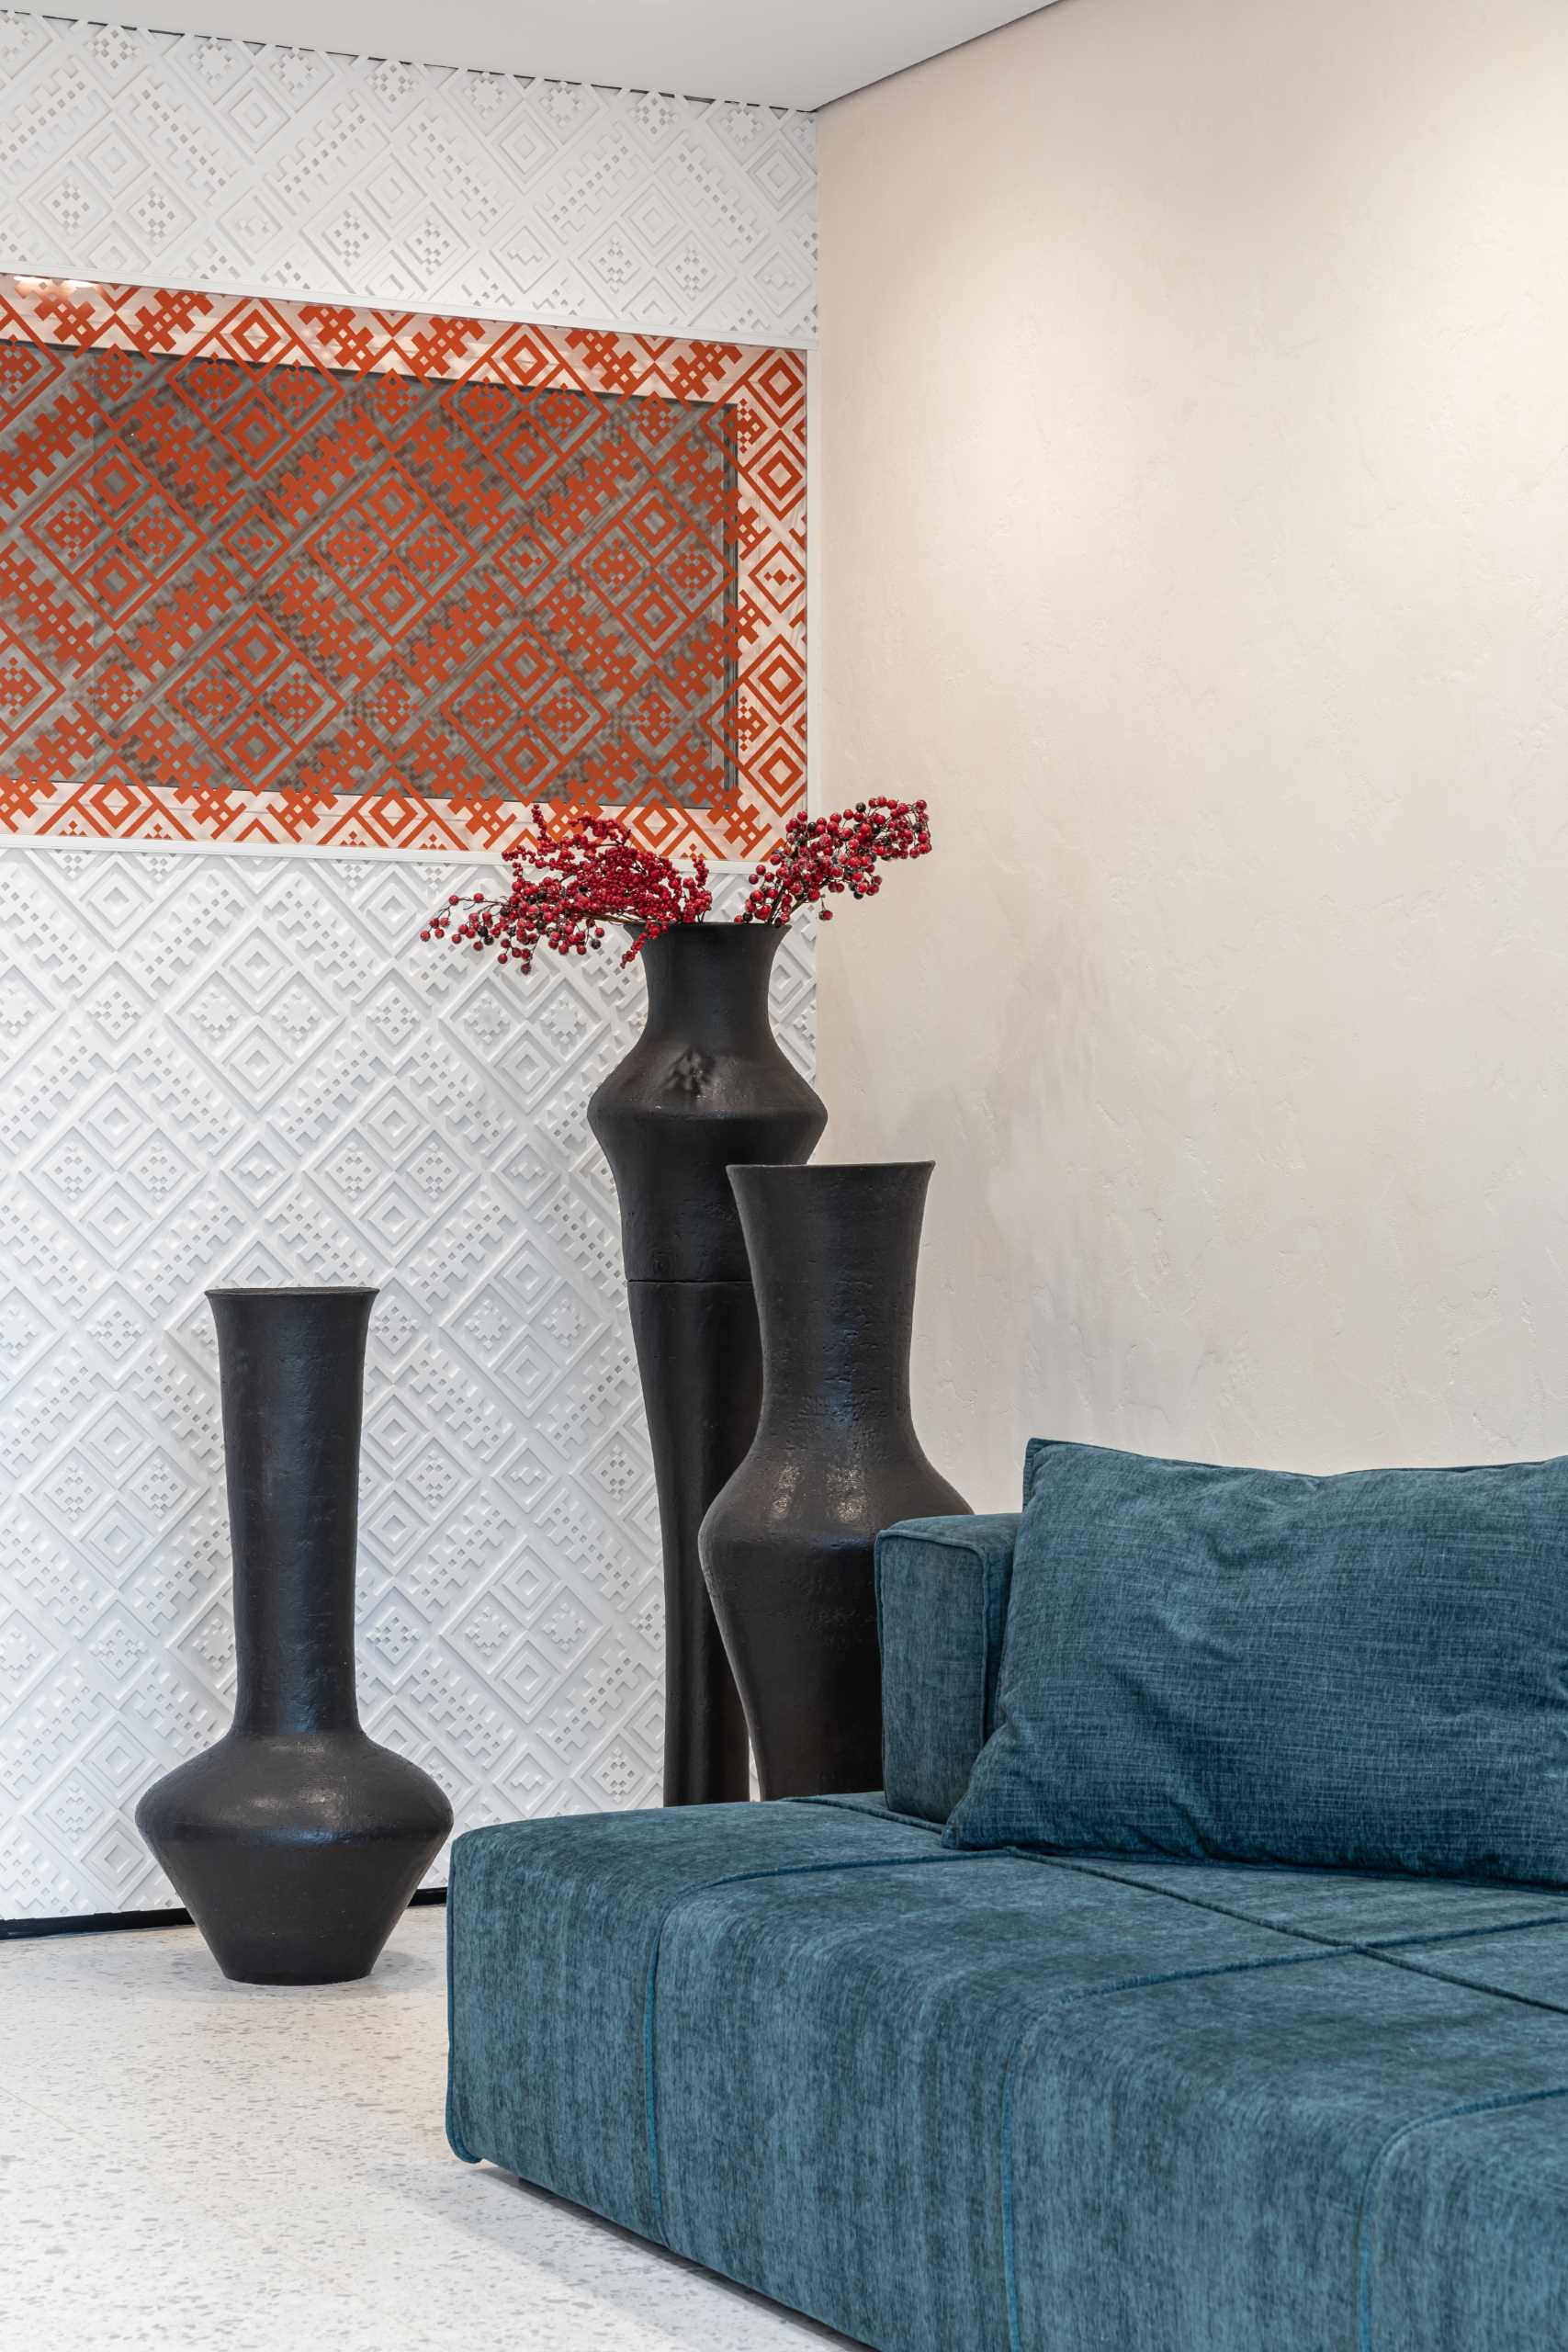 A delicate pattern on the wall transitions from white to red, while a large mirror reflects the turquoise couch.